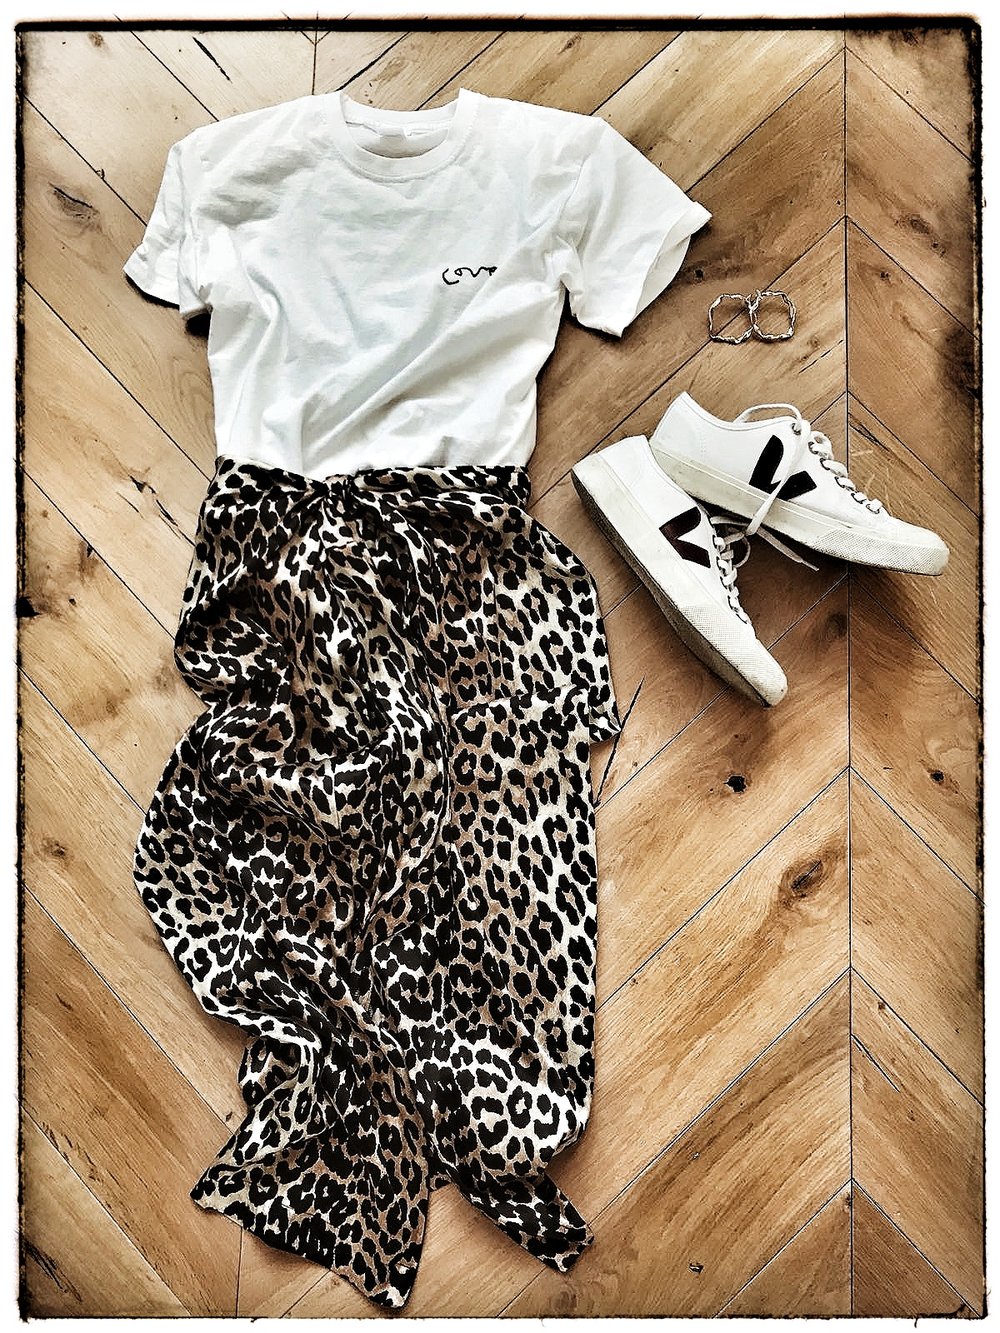  T-Short from  Meylor Goods , Skirt from  Ganni  and trainers from  Veja  